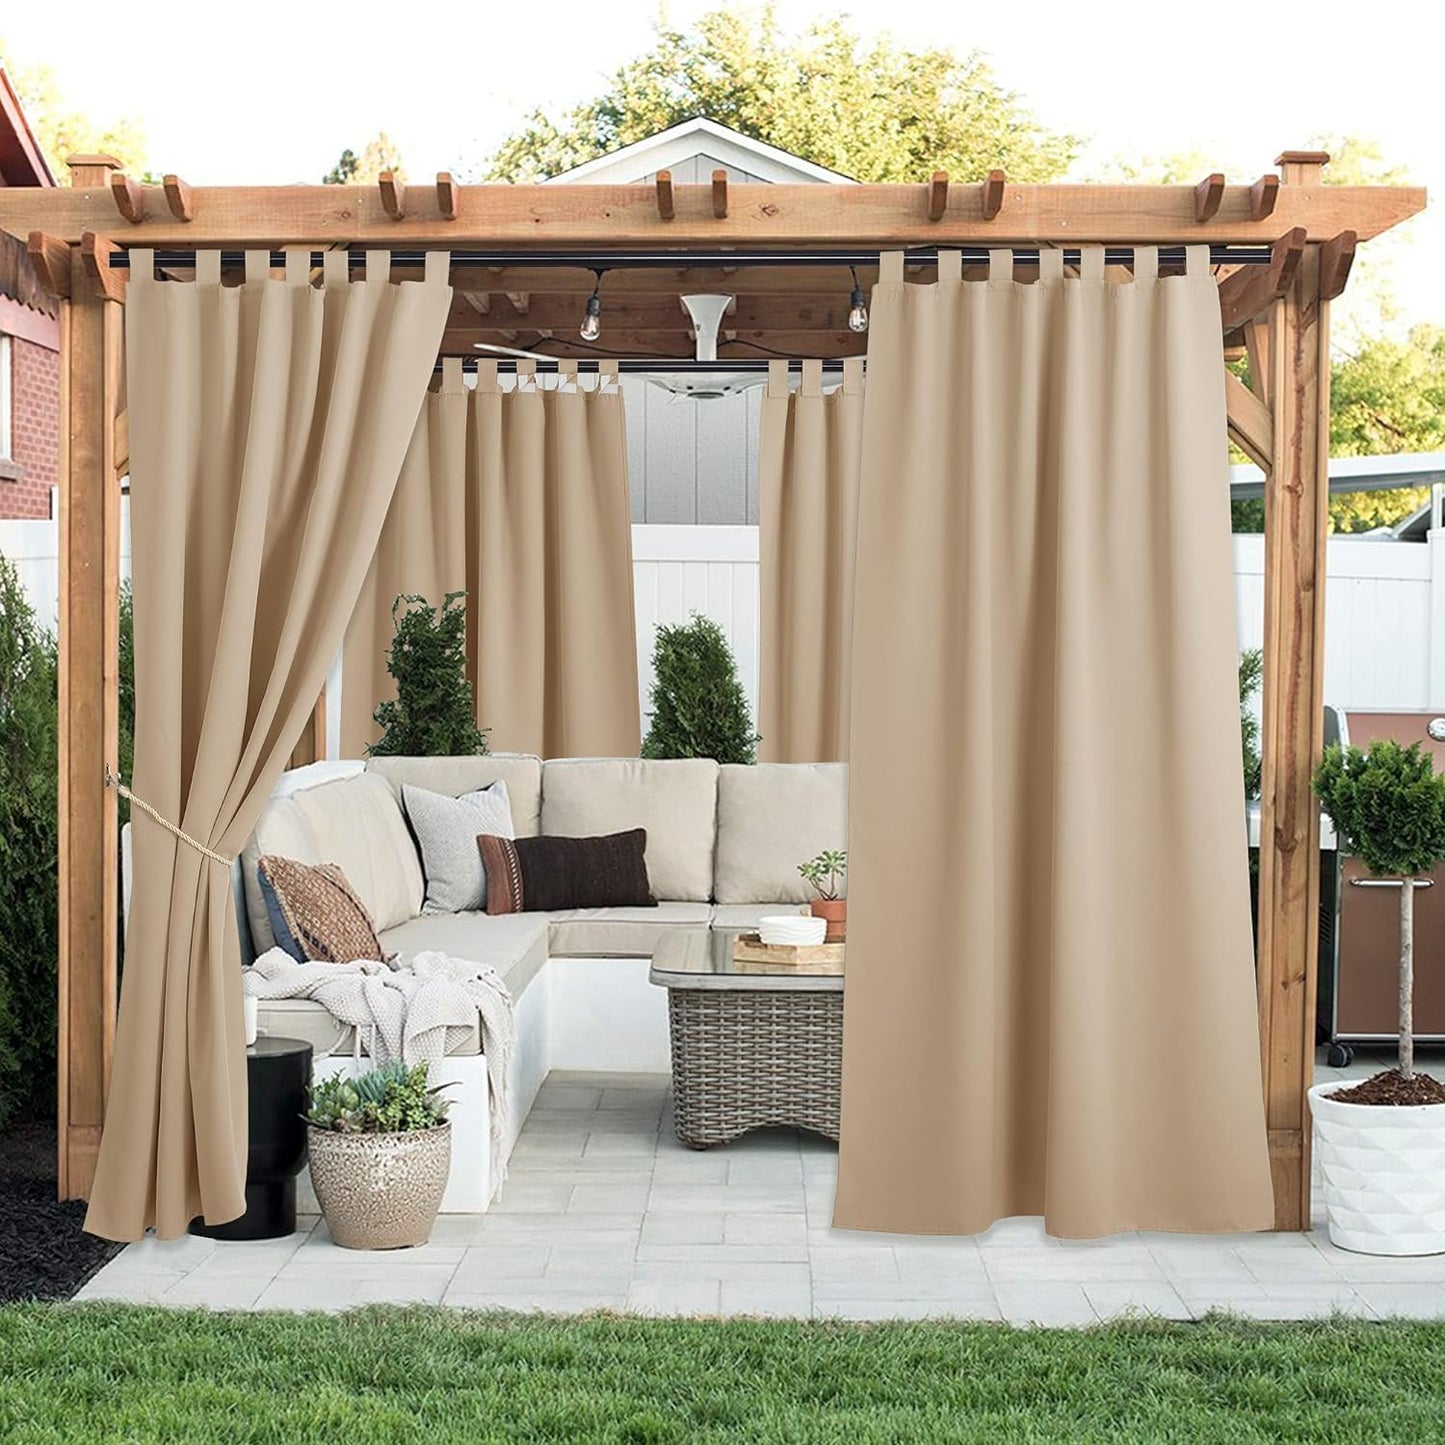 NICETOWN 2 Panels Outdoor Patio Curtainss Waterproof Room Darkening Drapes, Detachable Sticky Tab Top Thermal Insulated Privacy Outdoor Dividers for Porch/Doorway, Biscotti Beige, W52 X L84  NICETOWN   